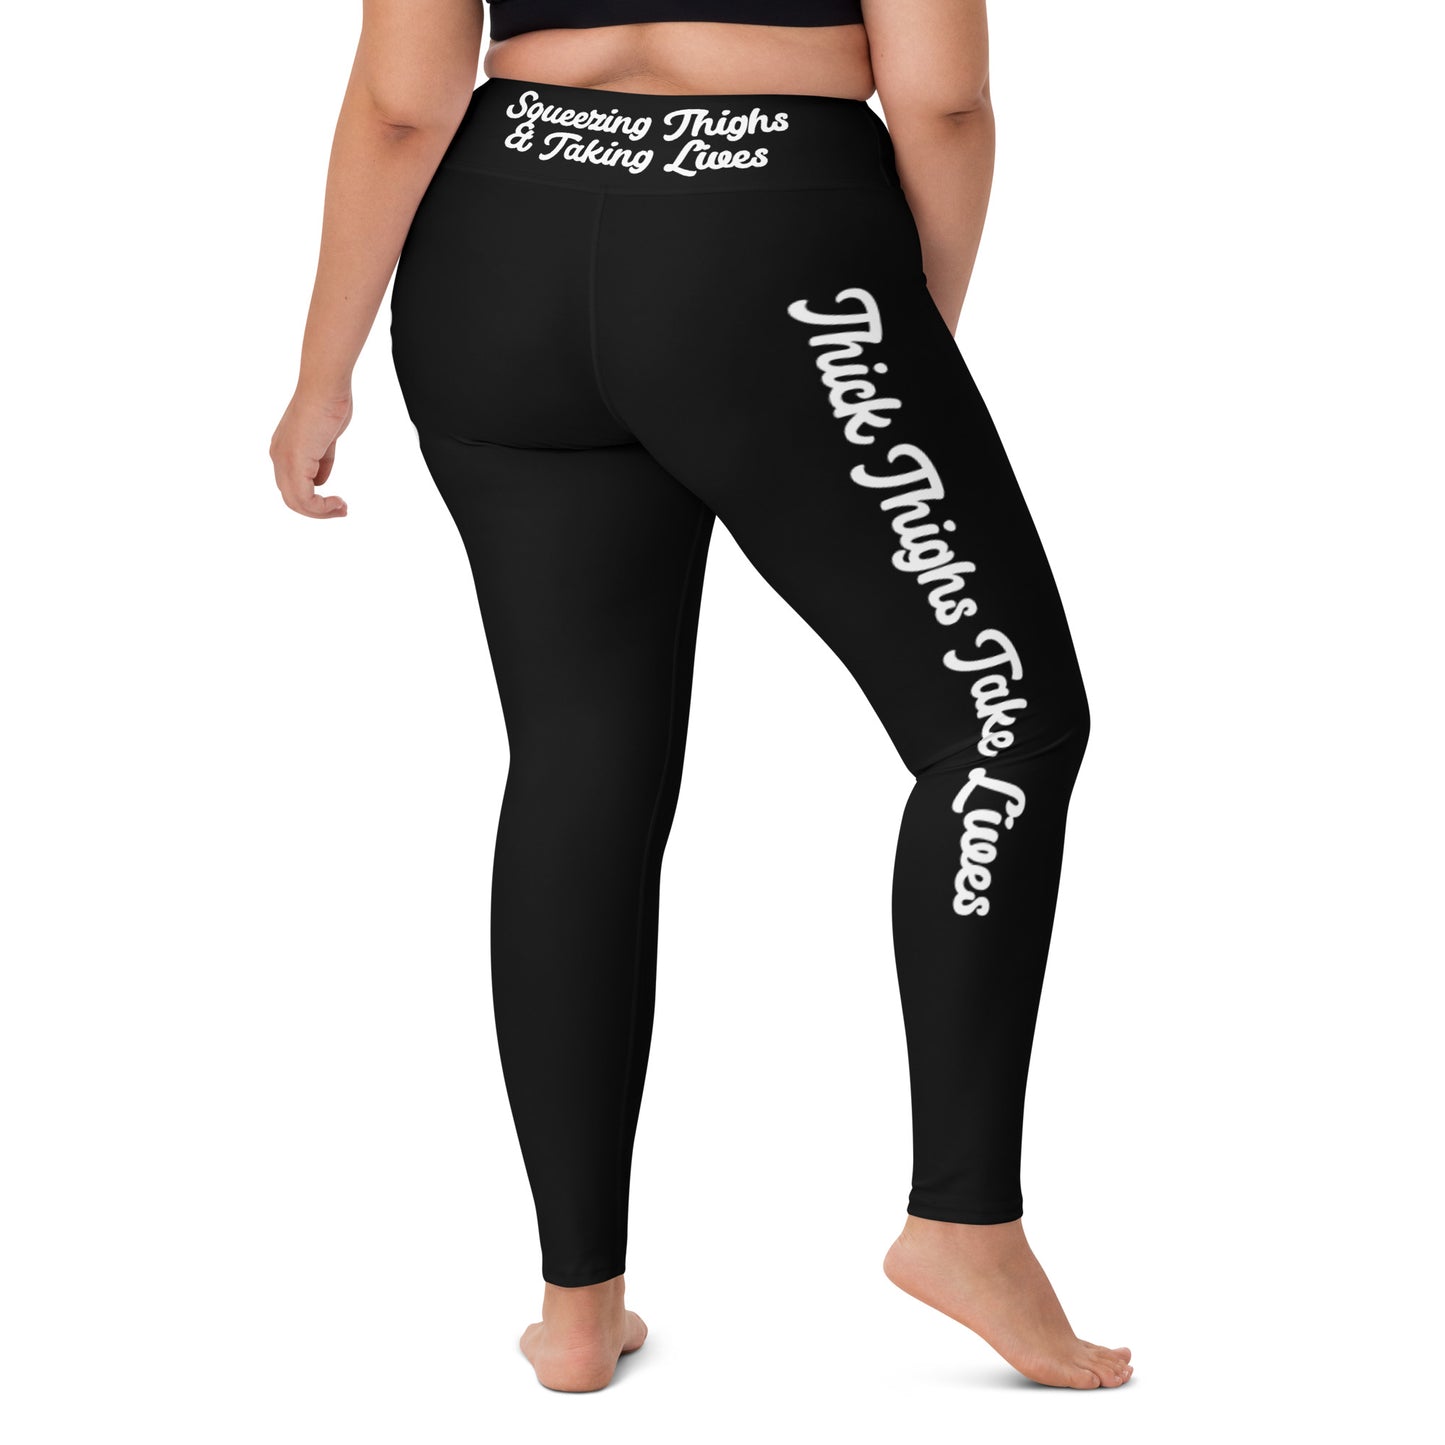 Thick Thighs Take Lives Leggings – Tee's By Teddy